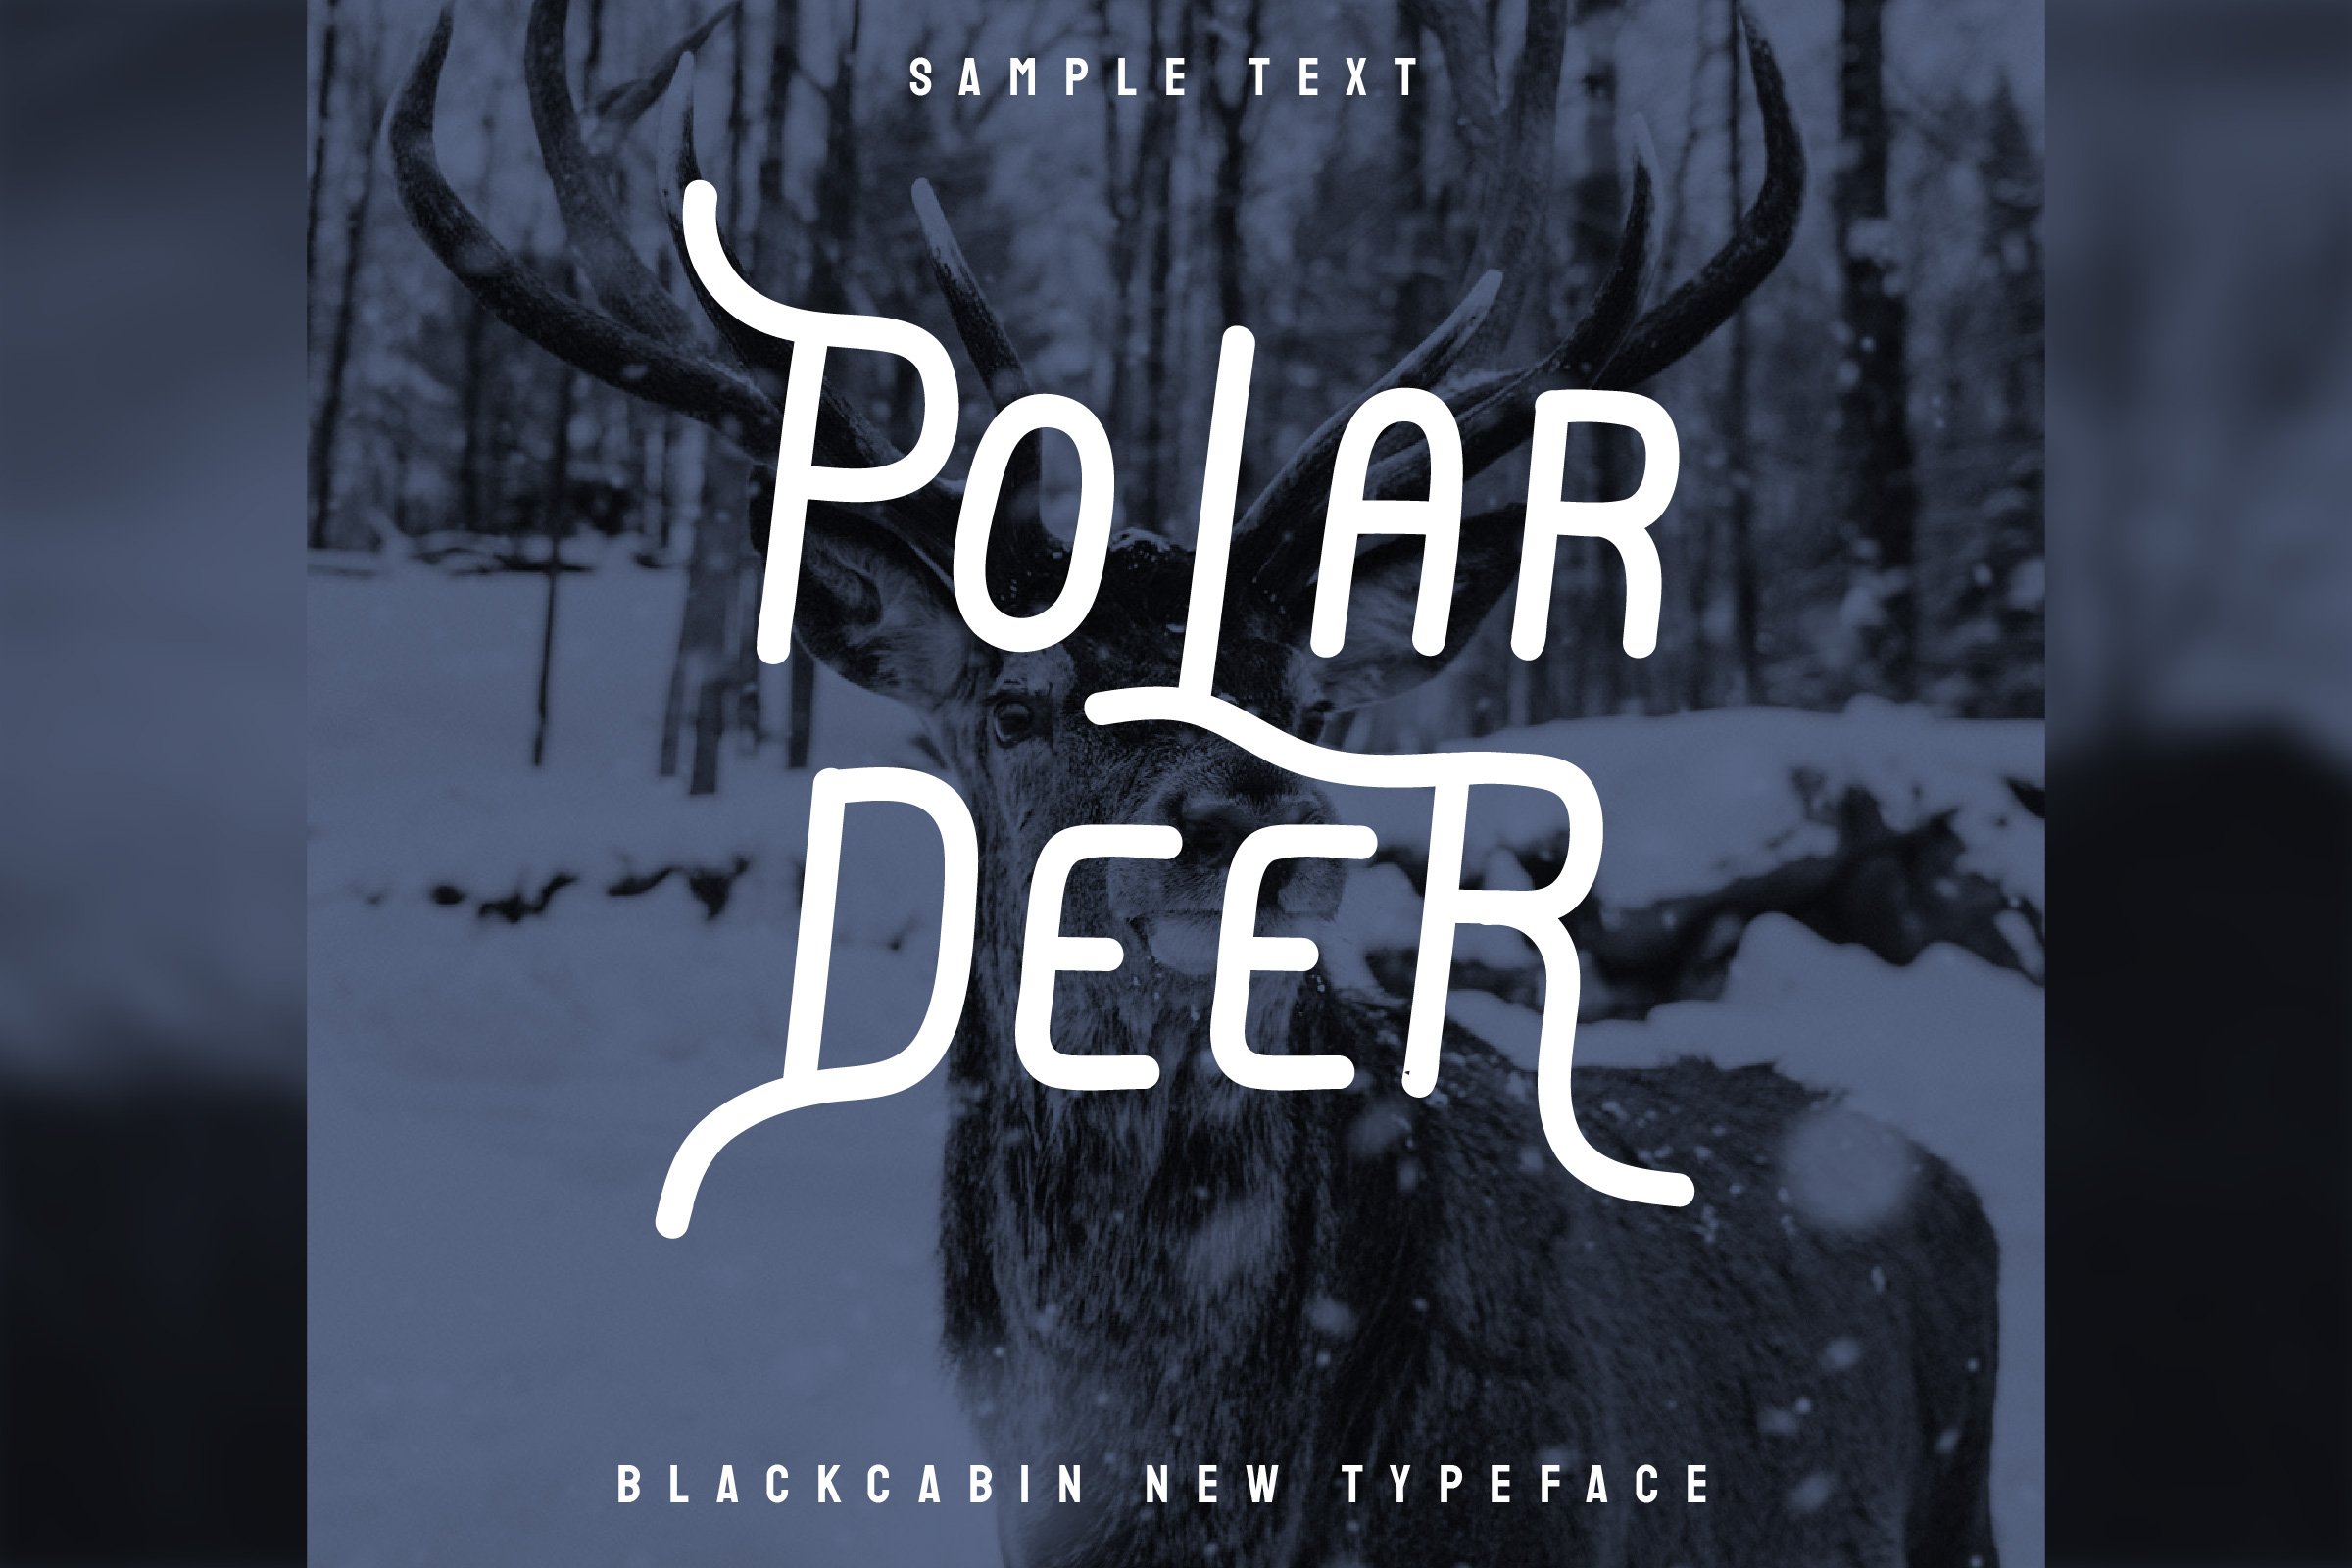 Original flowing font on the background of the polar deer.